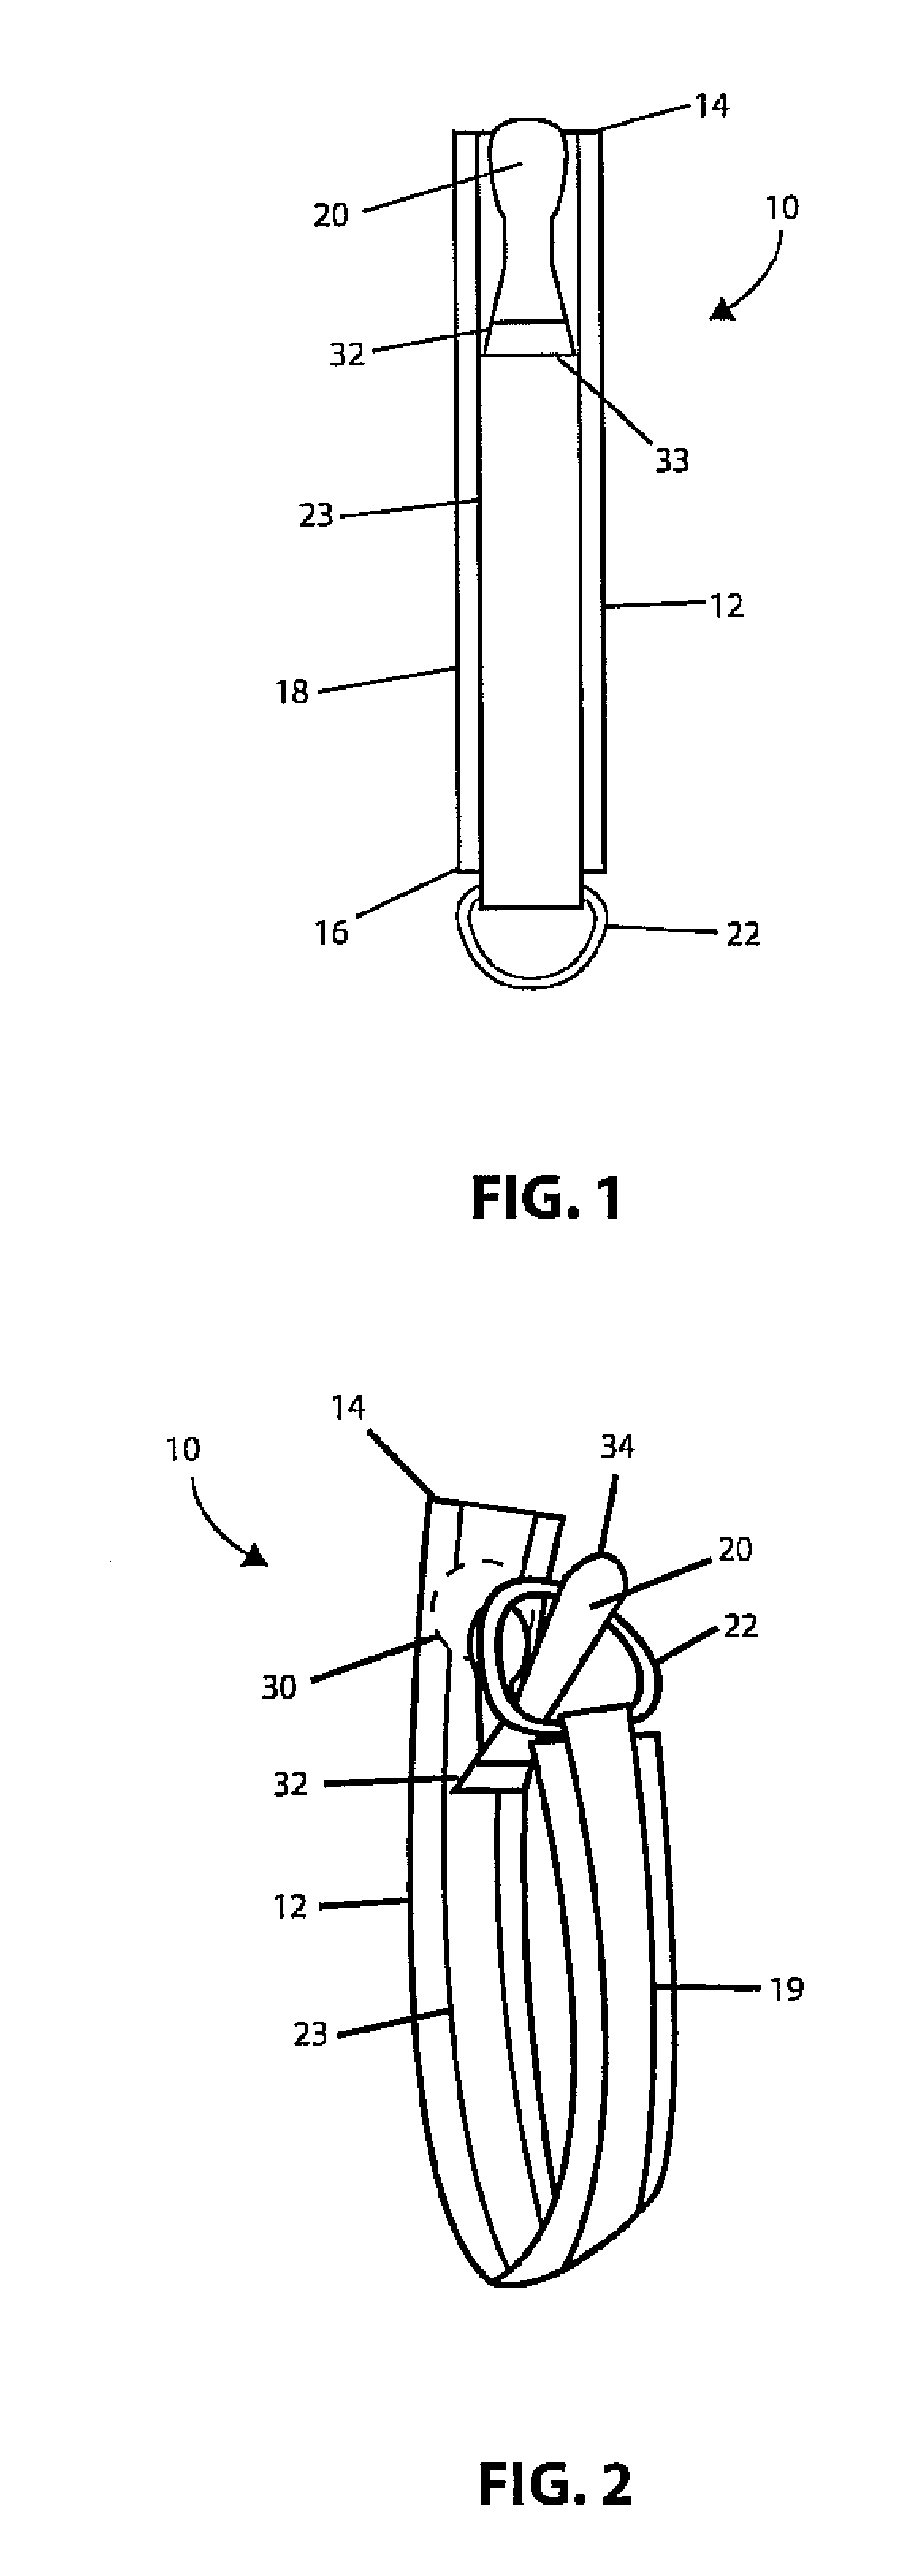 Clothing clip apparatus and method for using same